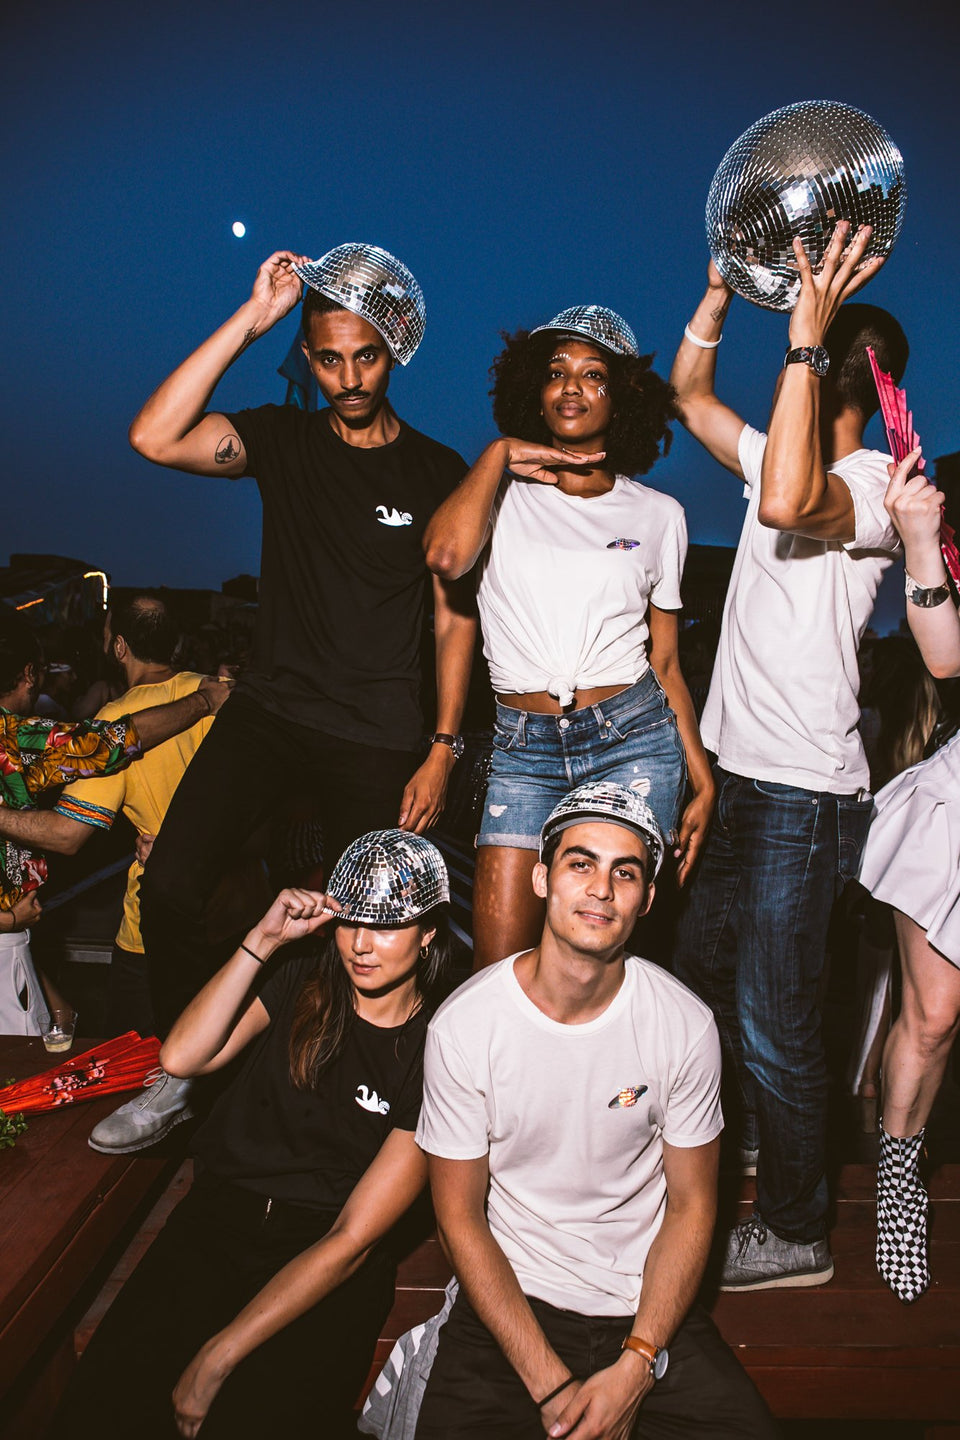 Male and female models all wearing the Thousand Deep disco hat, dancing to music with a disco ball. Photo taken on rooftop at Lightning Society in Brooklyn, New York